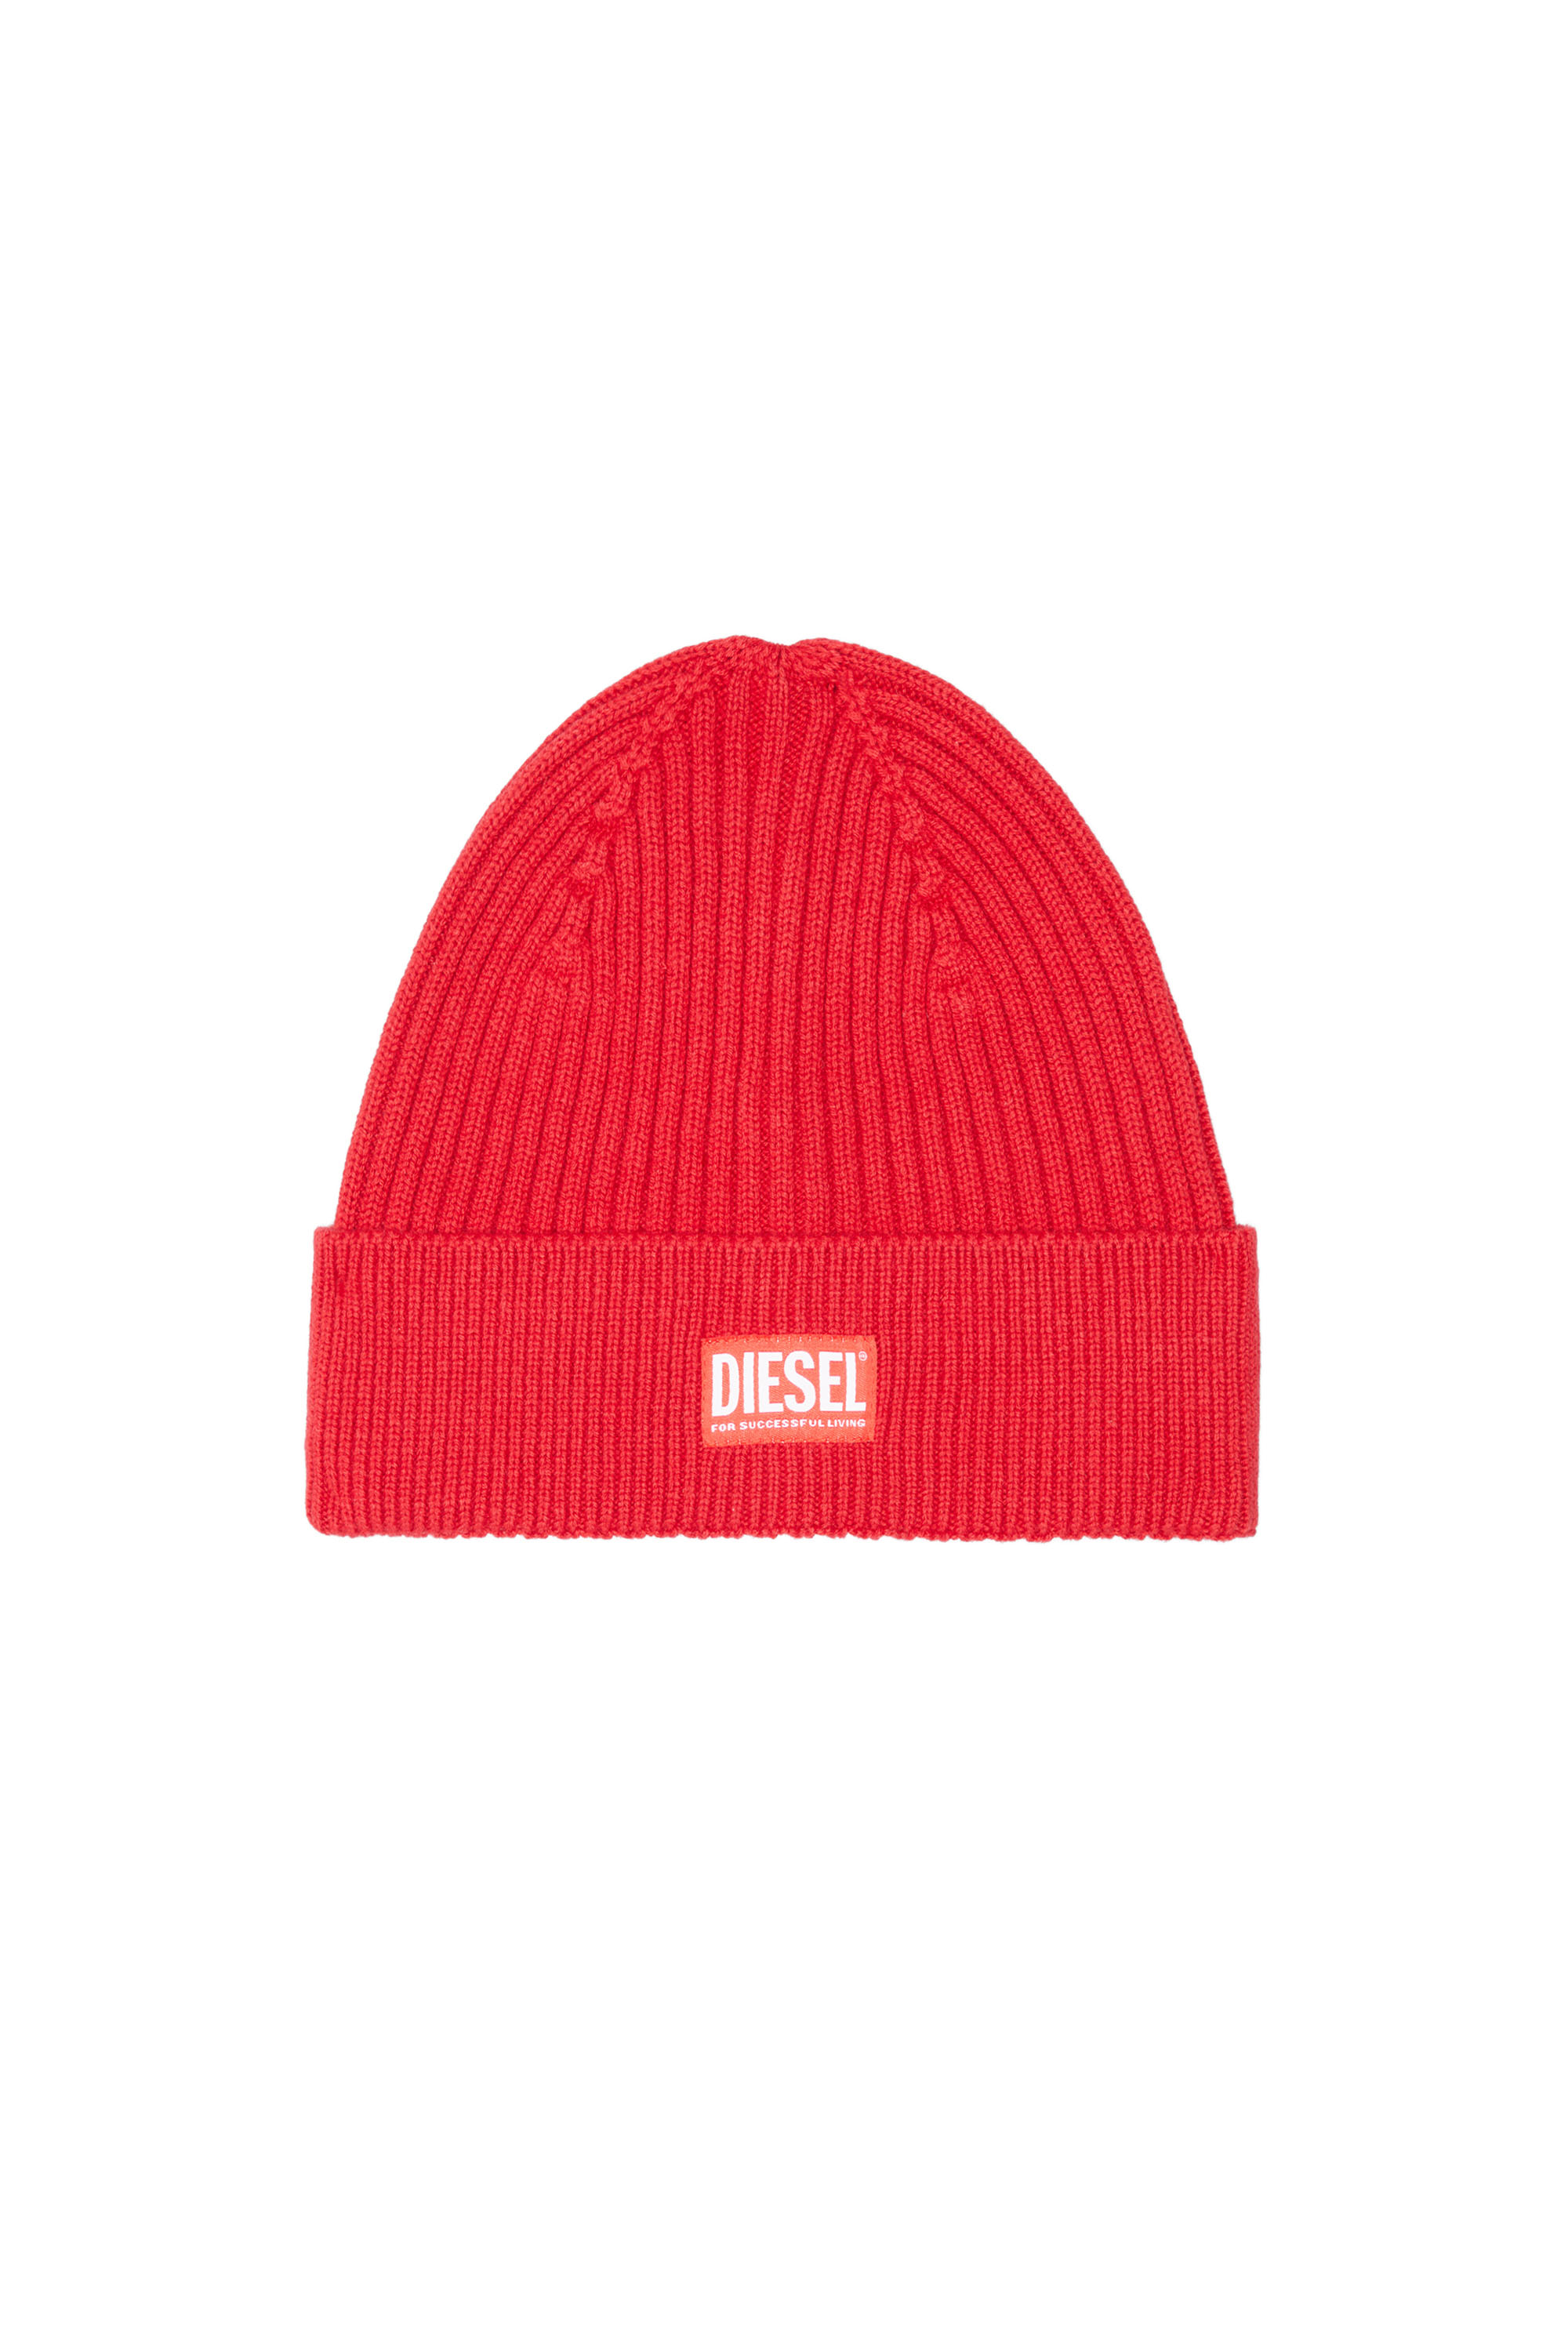 Diesel - Ribbed beanie with logo patch - Knit caps - Unisex - Red